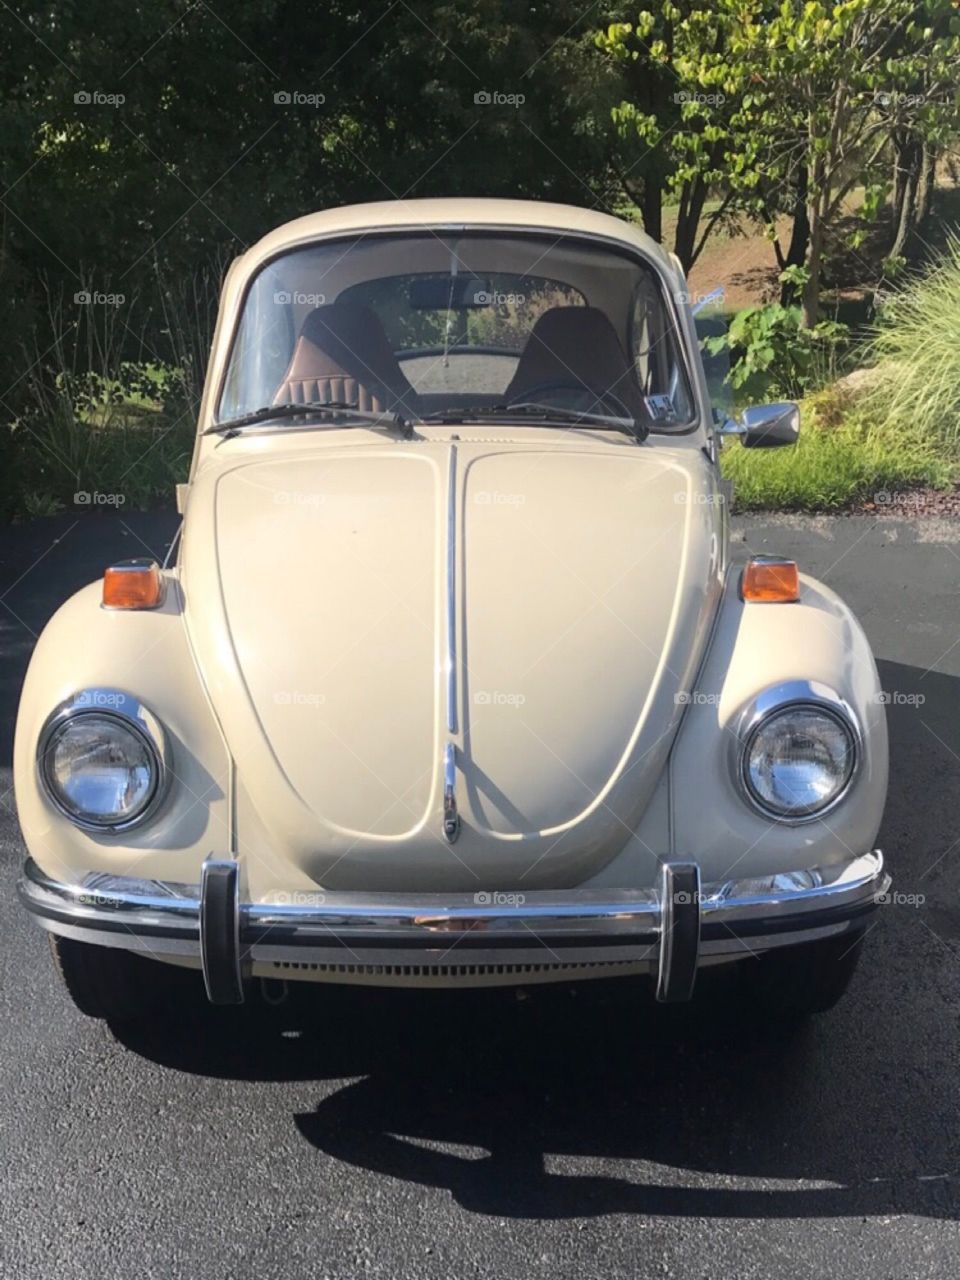 This cute little vintage and classic beetle sits among a sunny backdrop. So cute! 